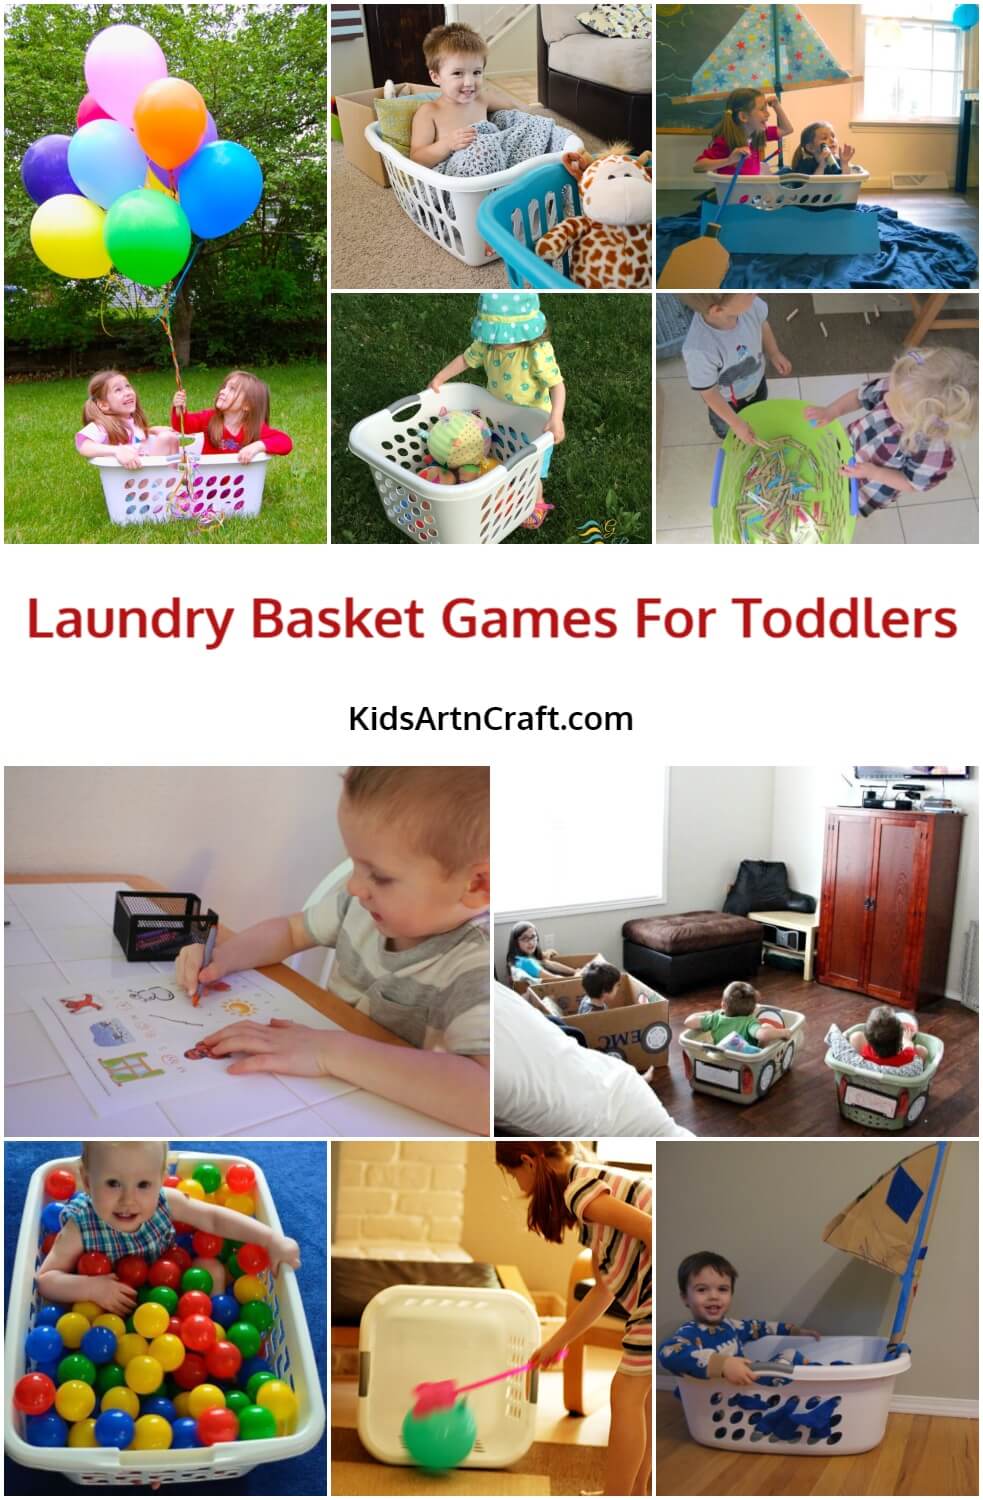 laundry-basket-games-for-toddlers